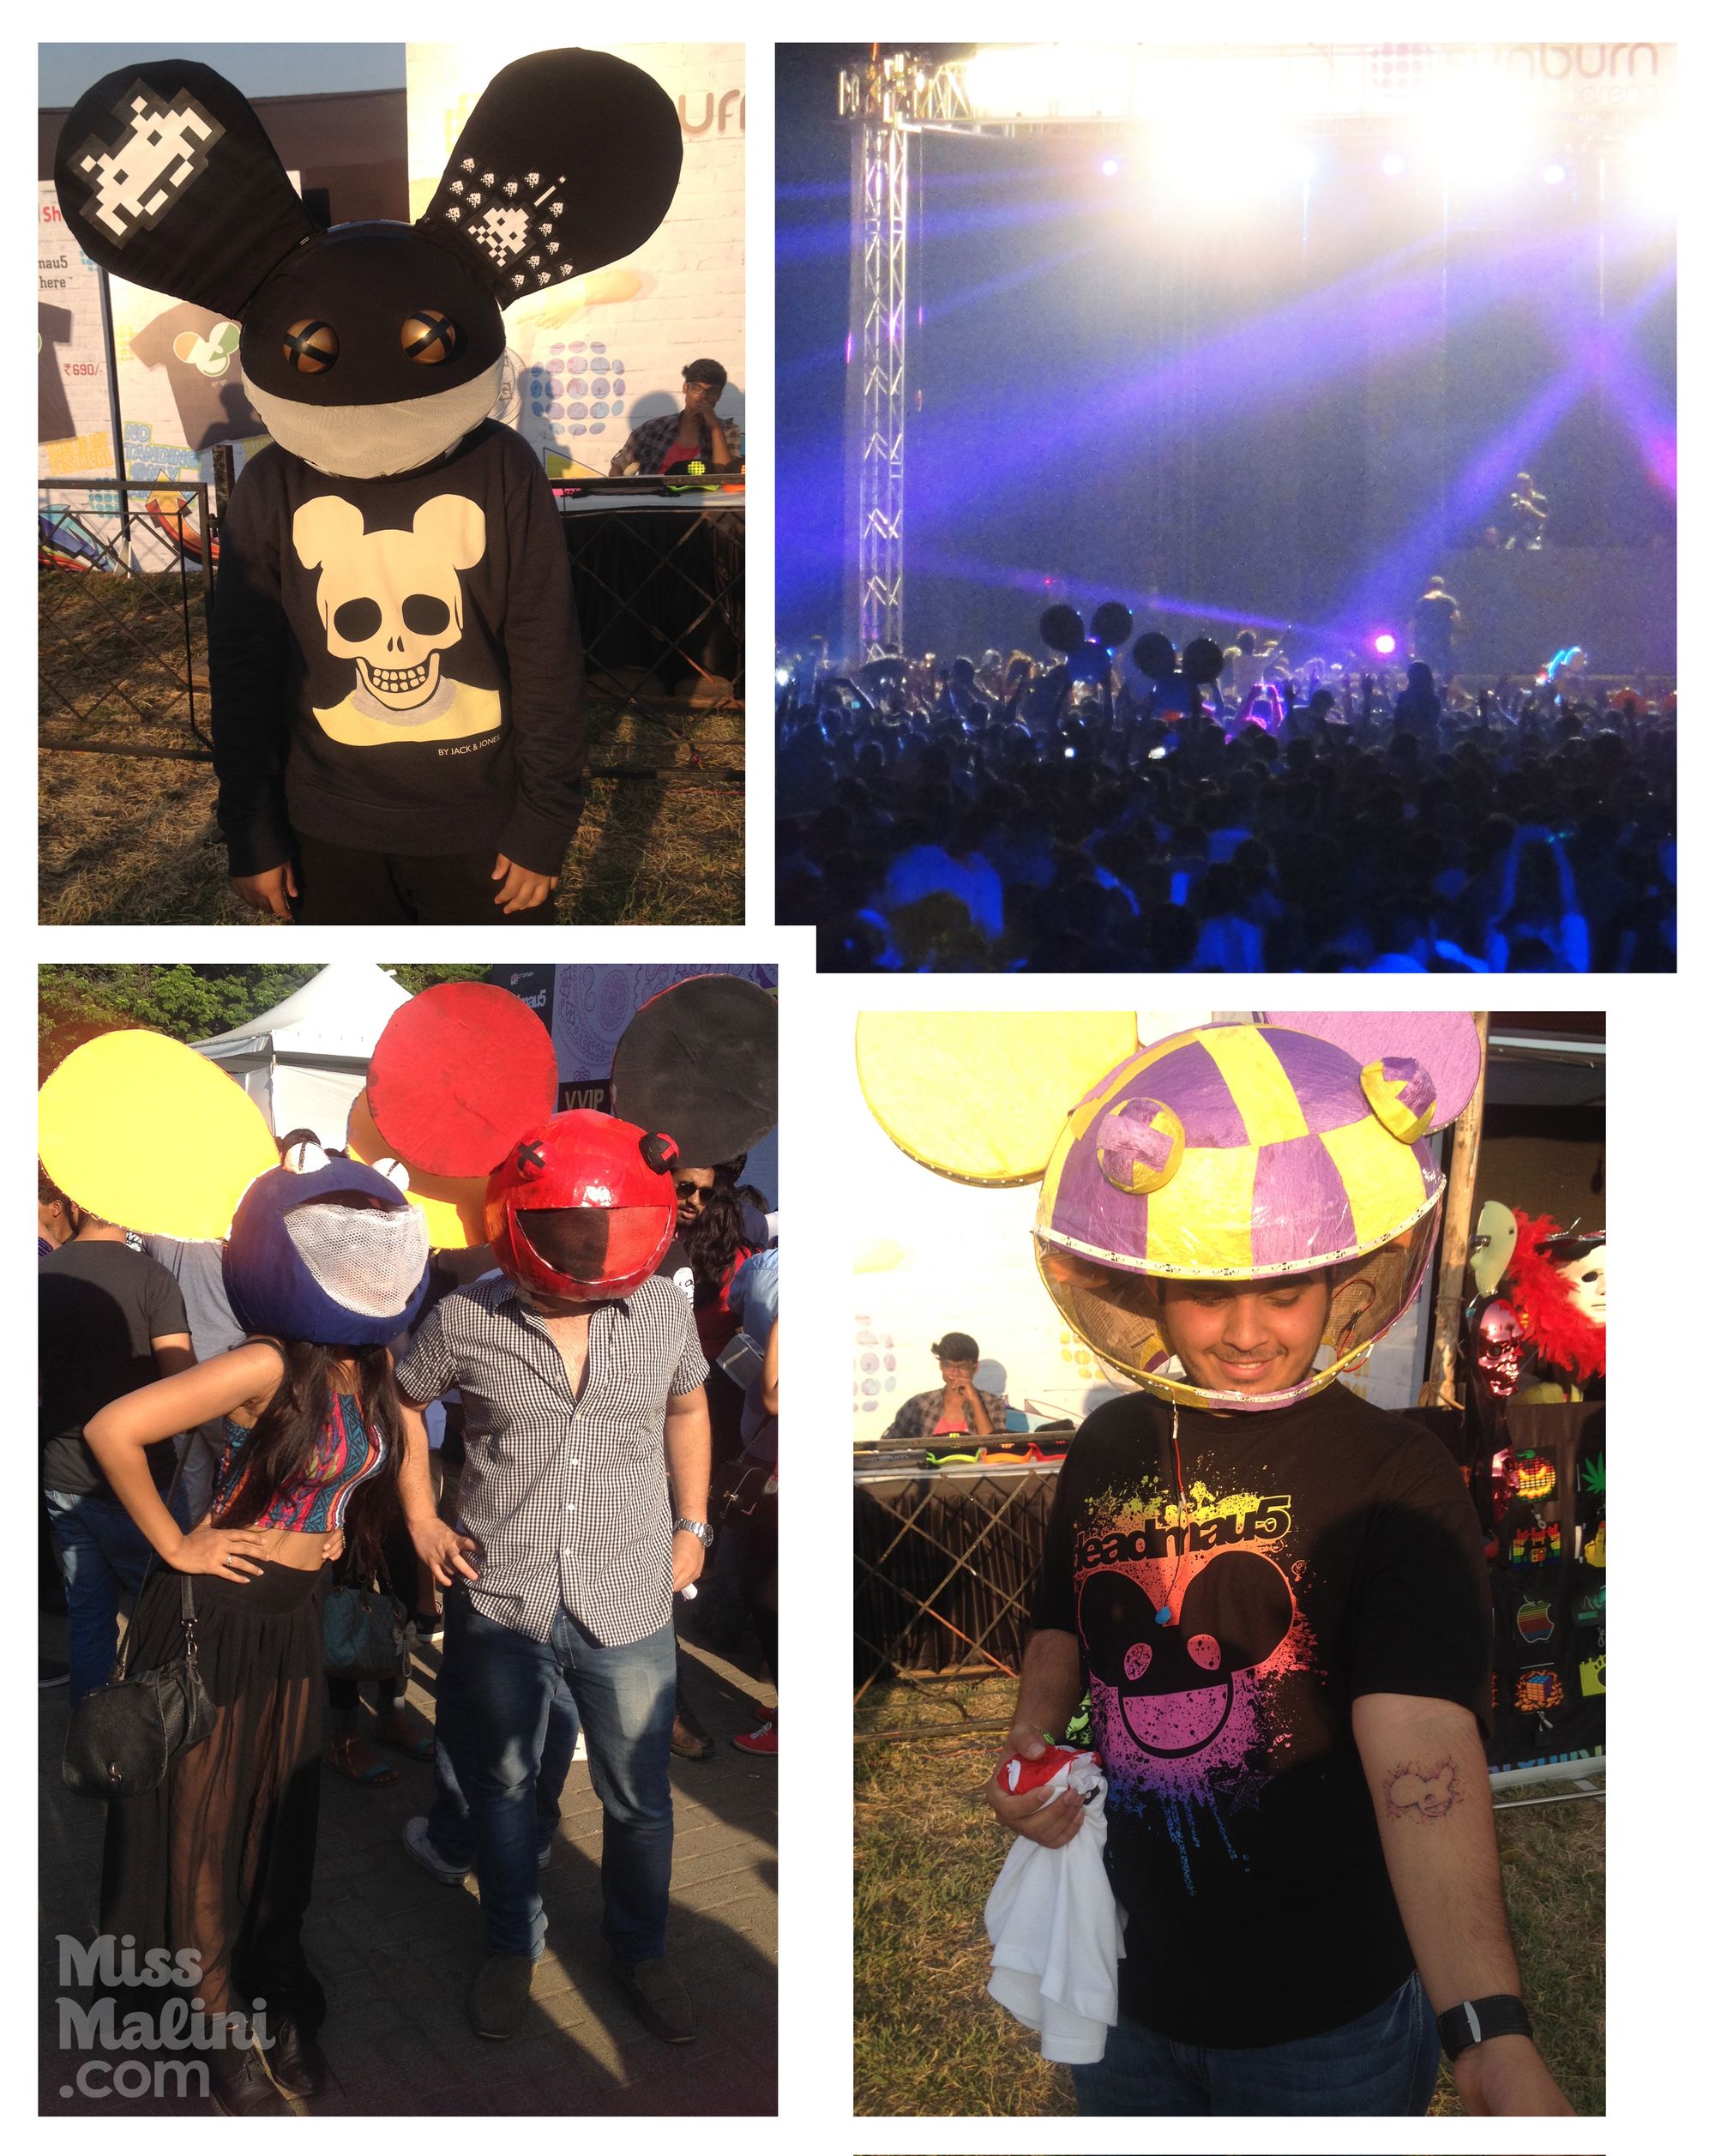 Fans show support by wearing the signature Mau5head